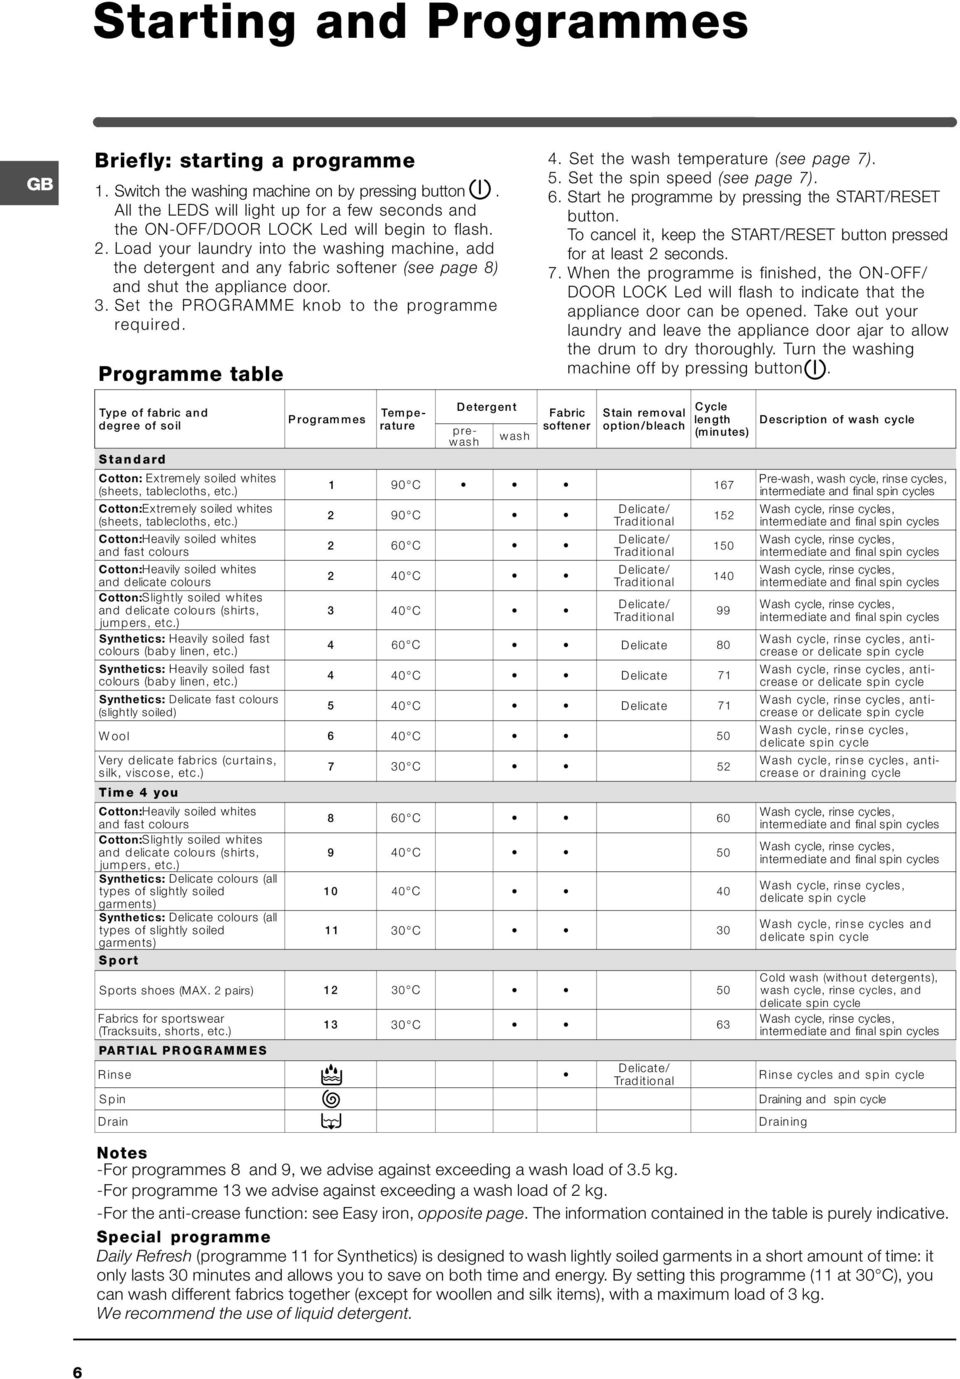 Load your laundry into the washing machine, add the detergent and any fabric softener (see page 8) and shut the appliance door. 3. Set the PROGRAMME knob to the programme required. Programme table 4.